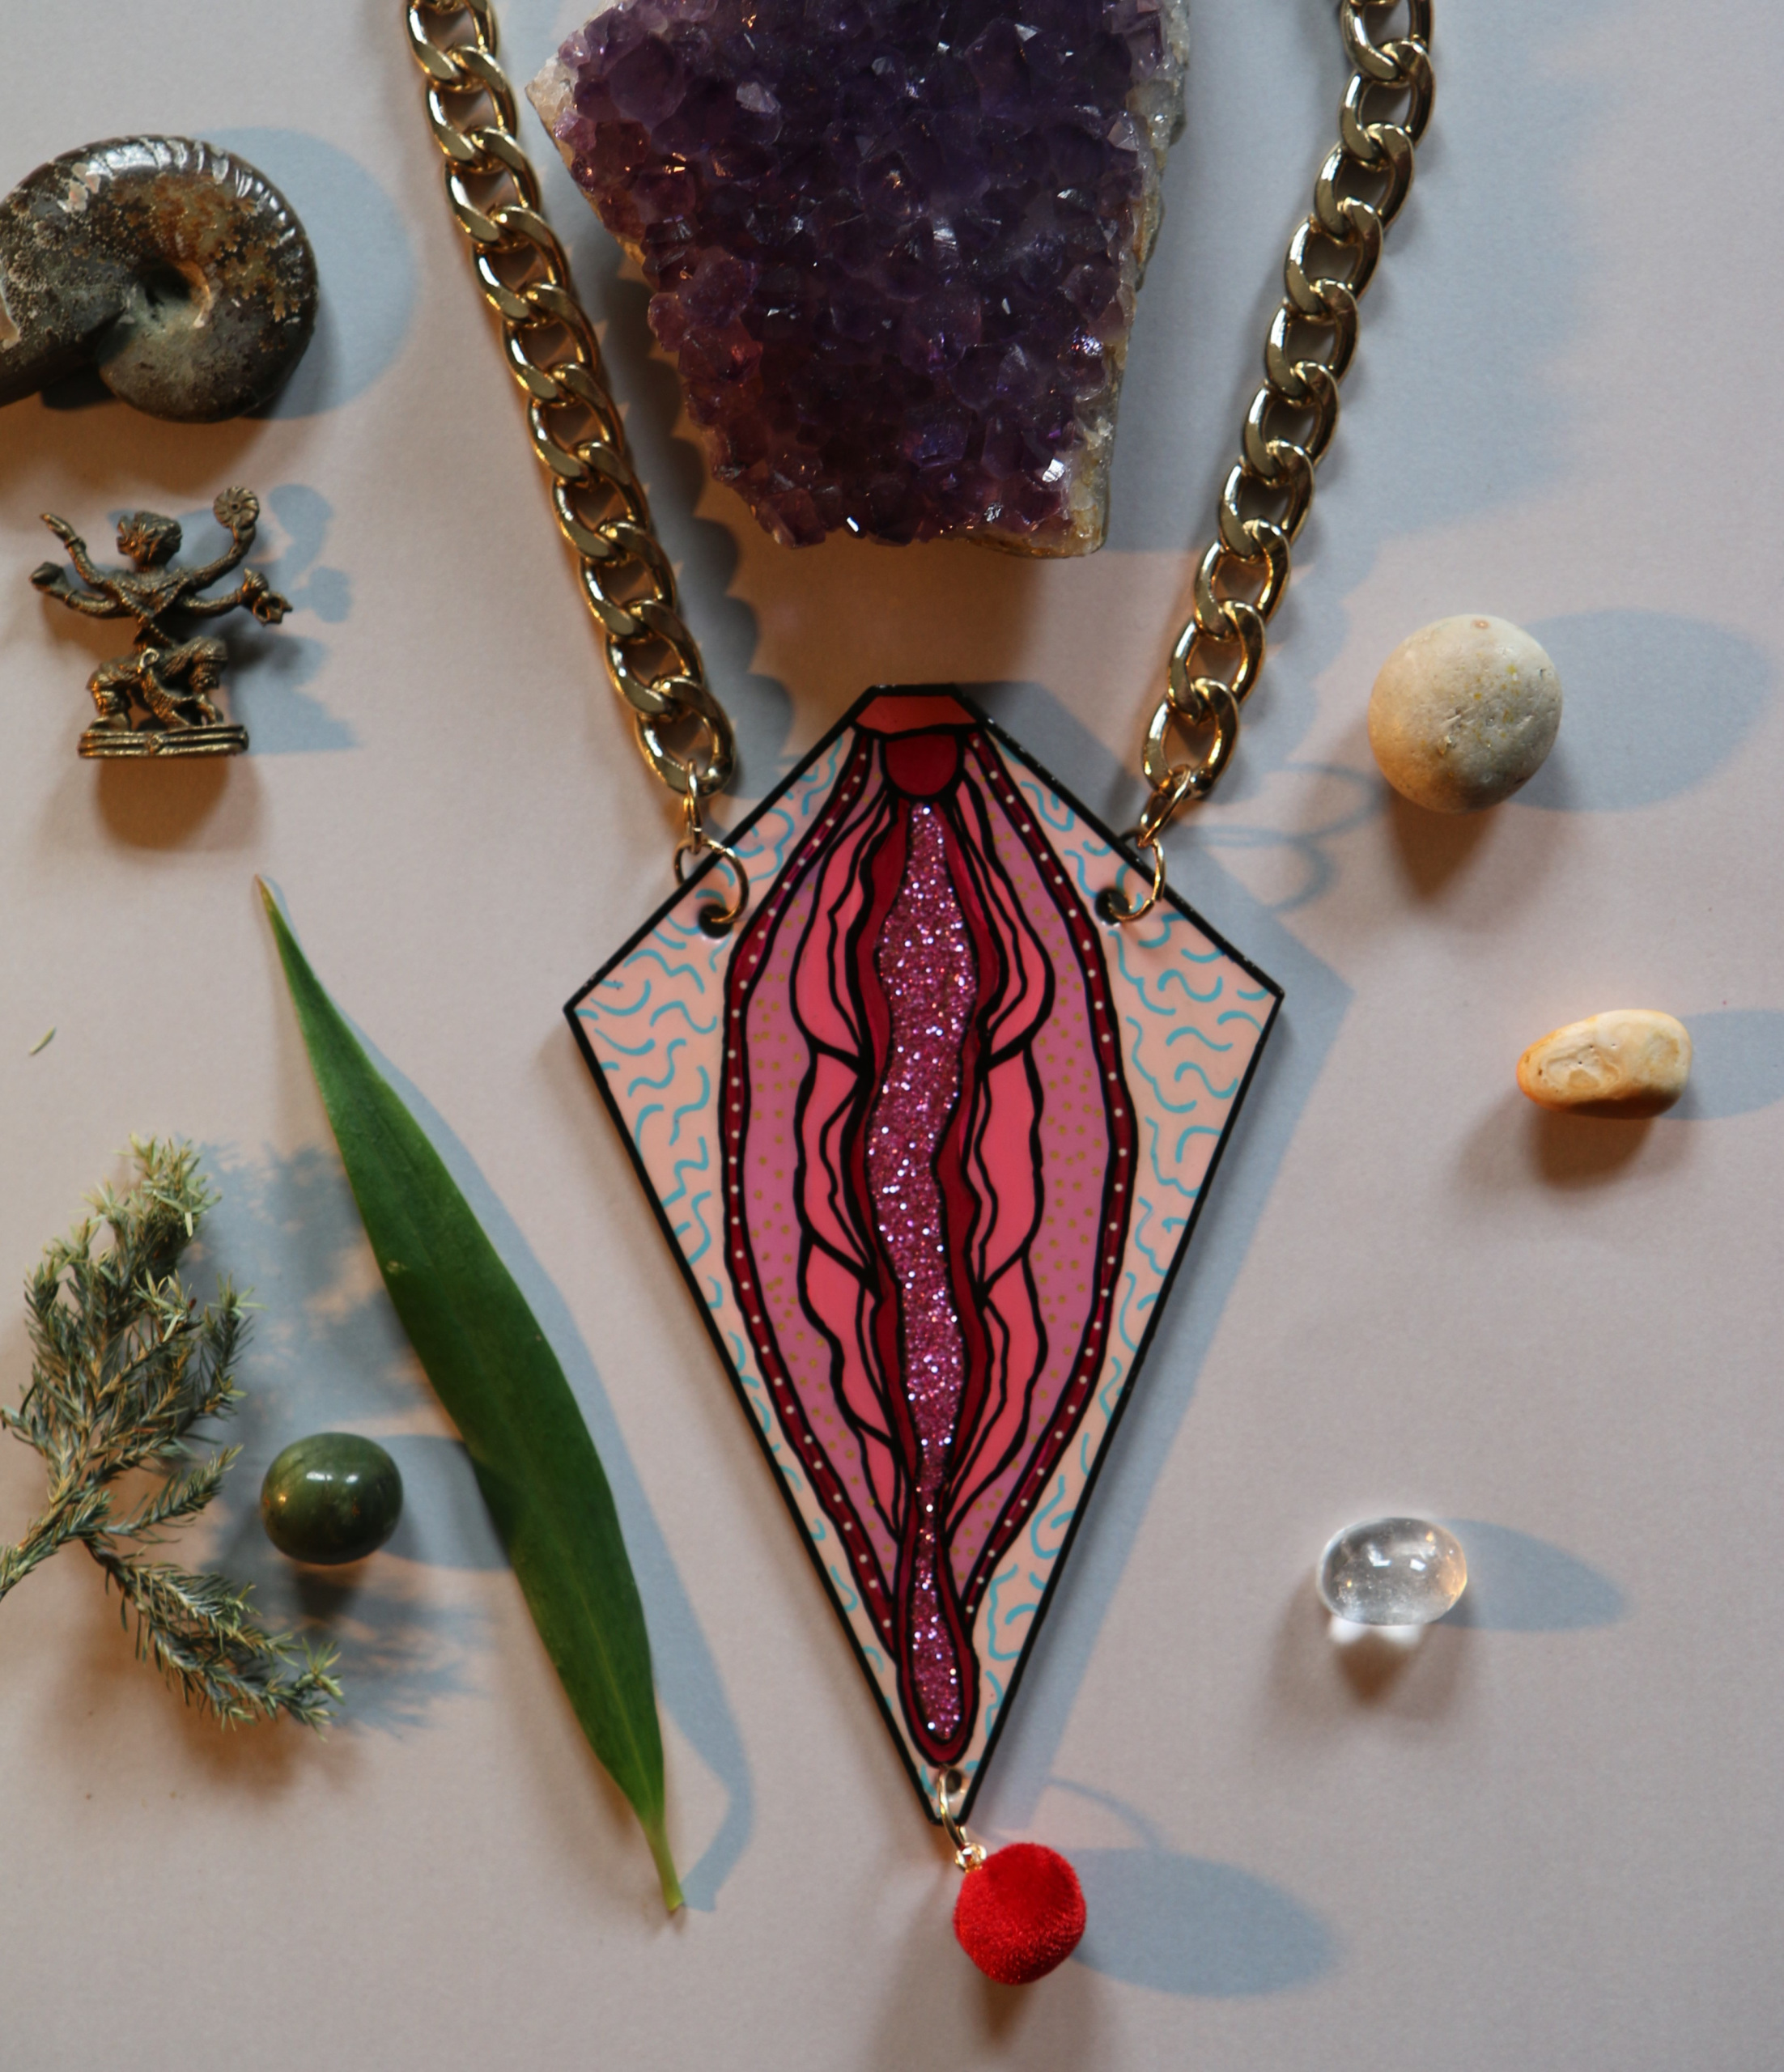 Vagina Necklace With Glitter And Red Period Ball